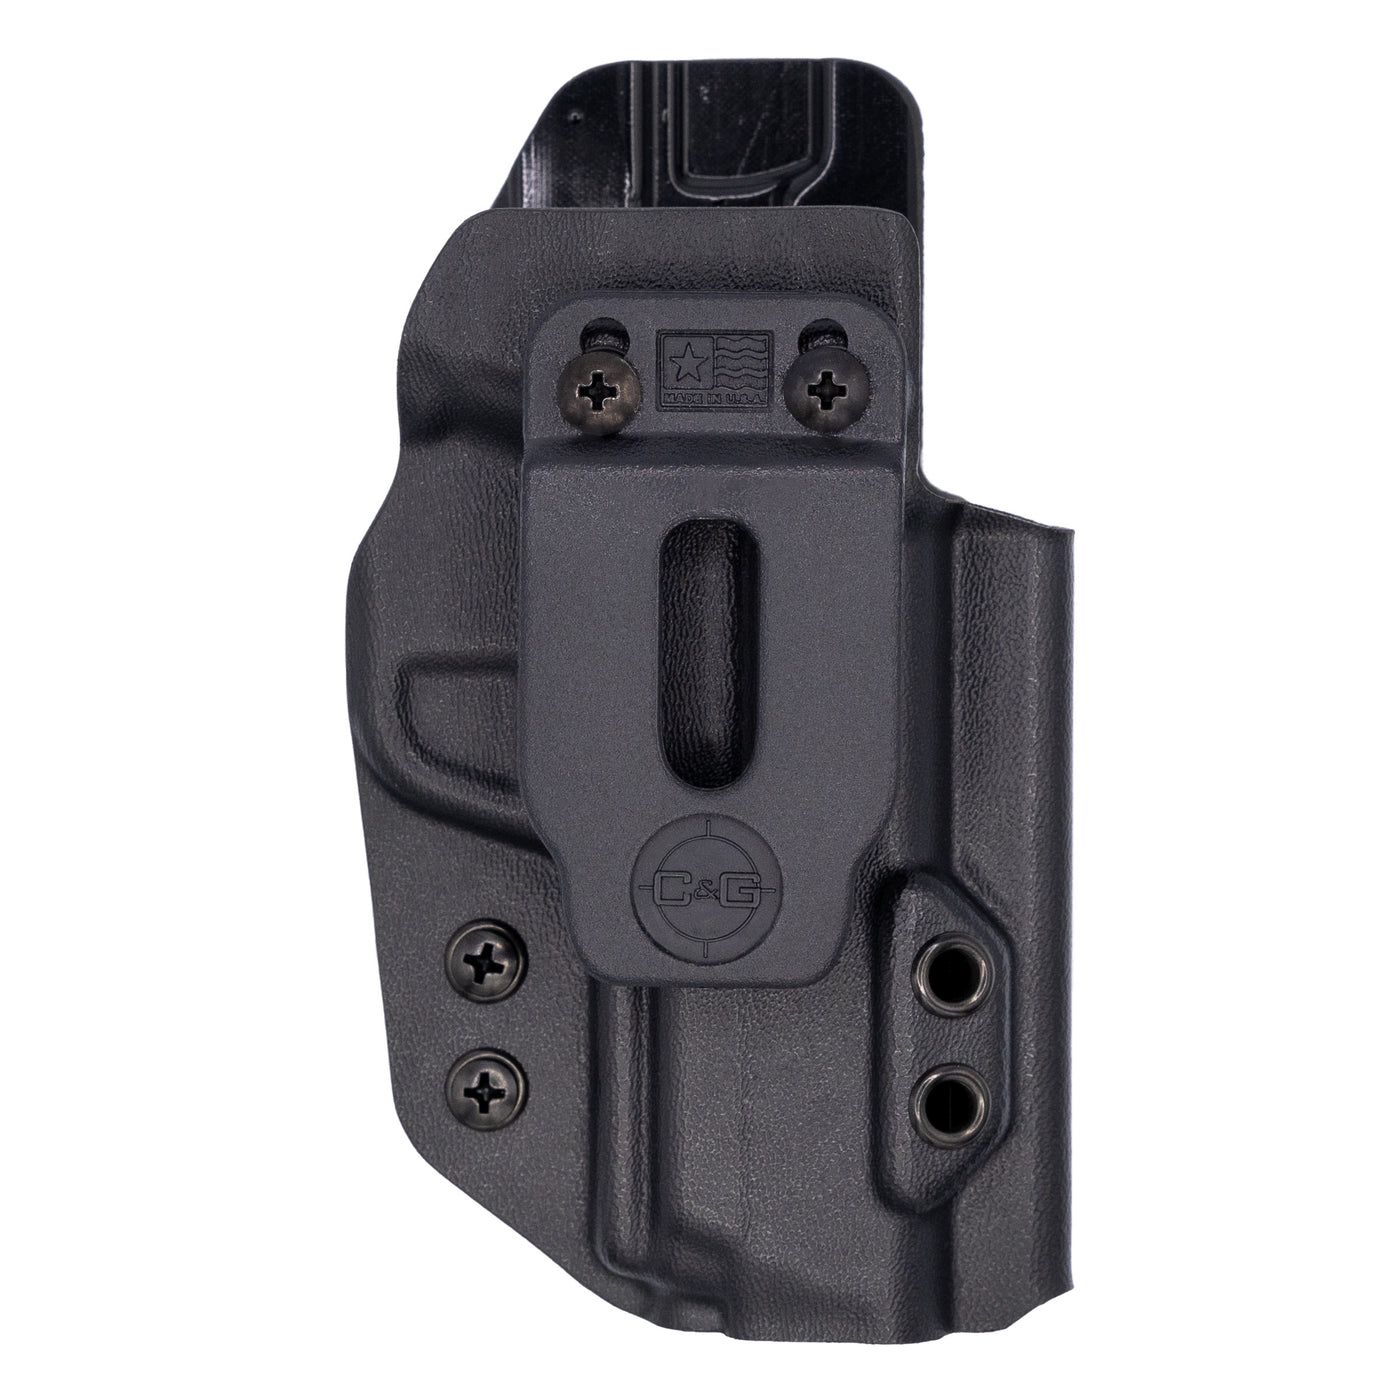 This is a C&G Holsters Covert series Inside the Waistband Smith & Wesson M&P Shield 9EZ without the firearm showing a front view.